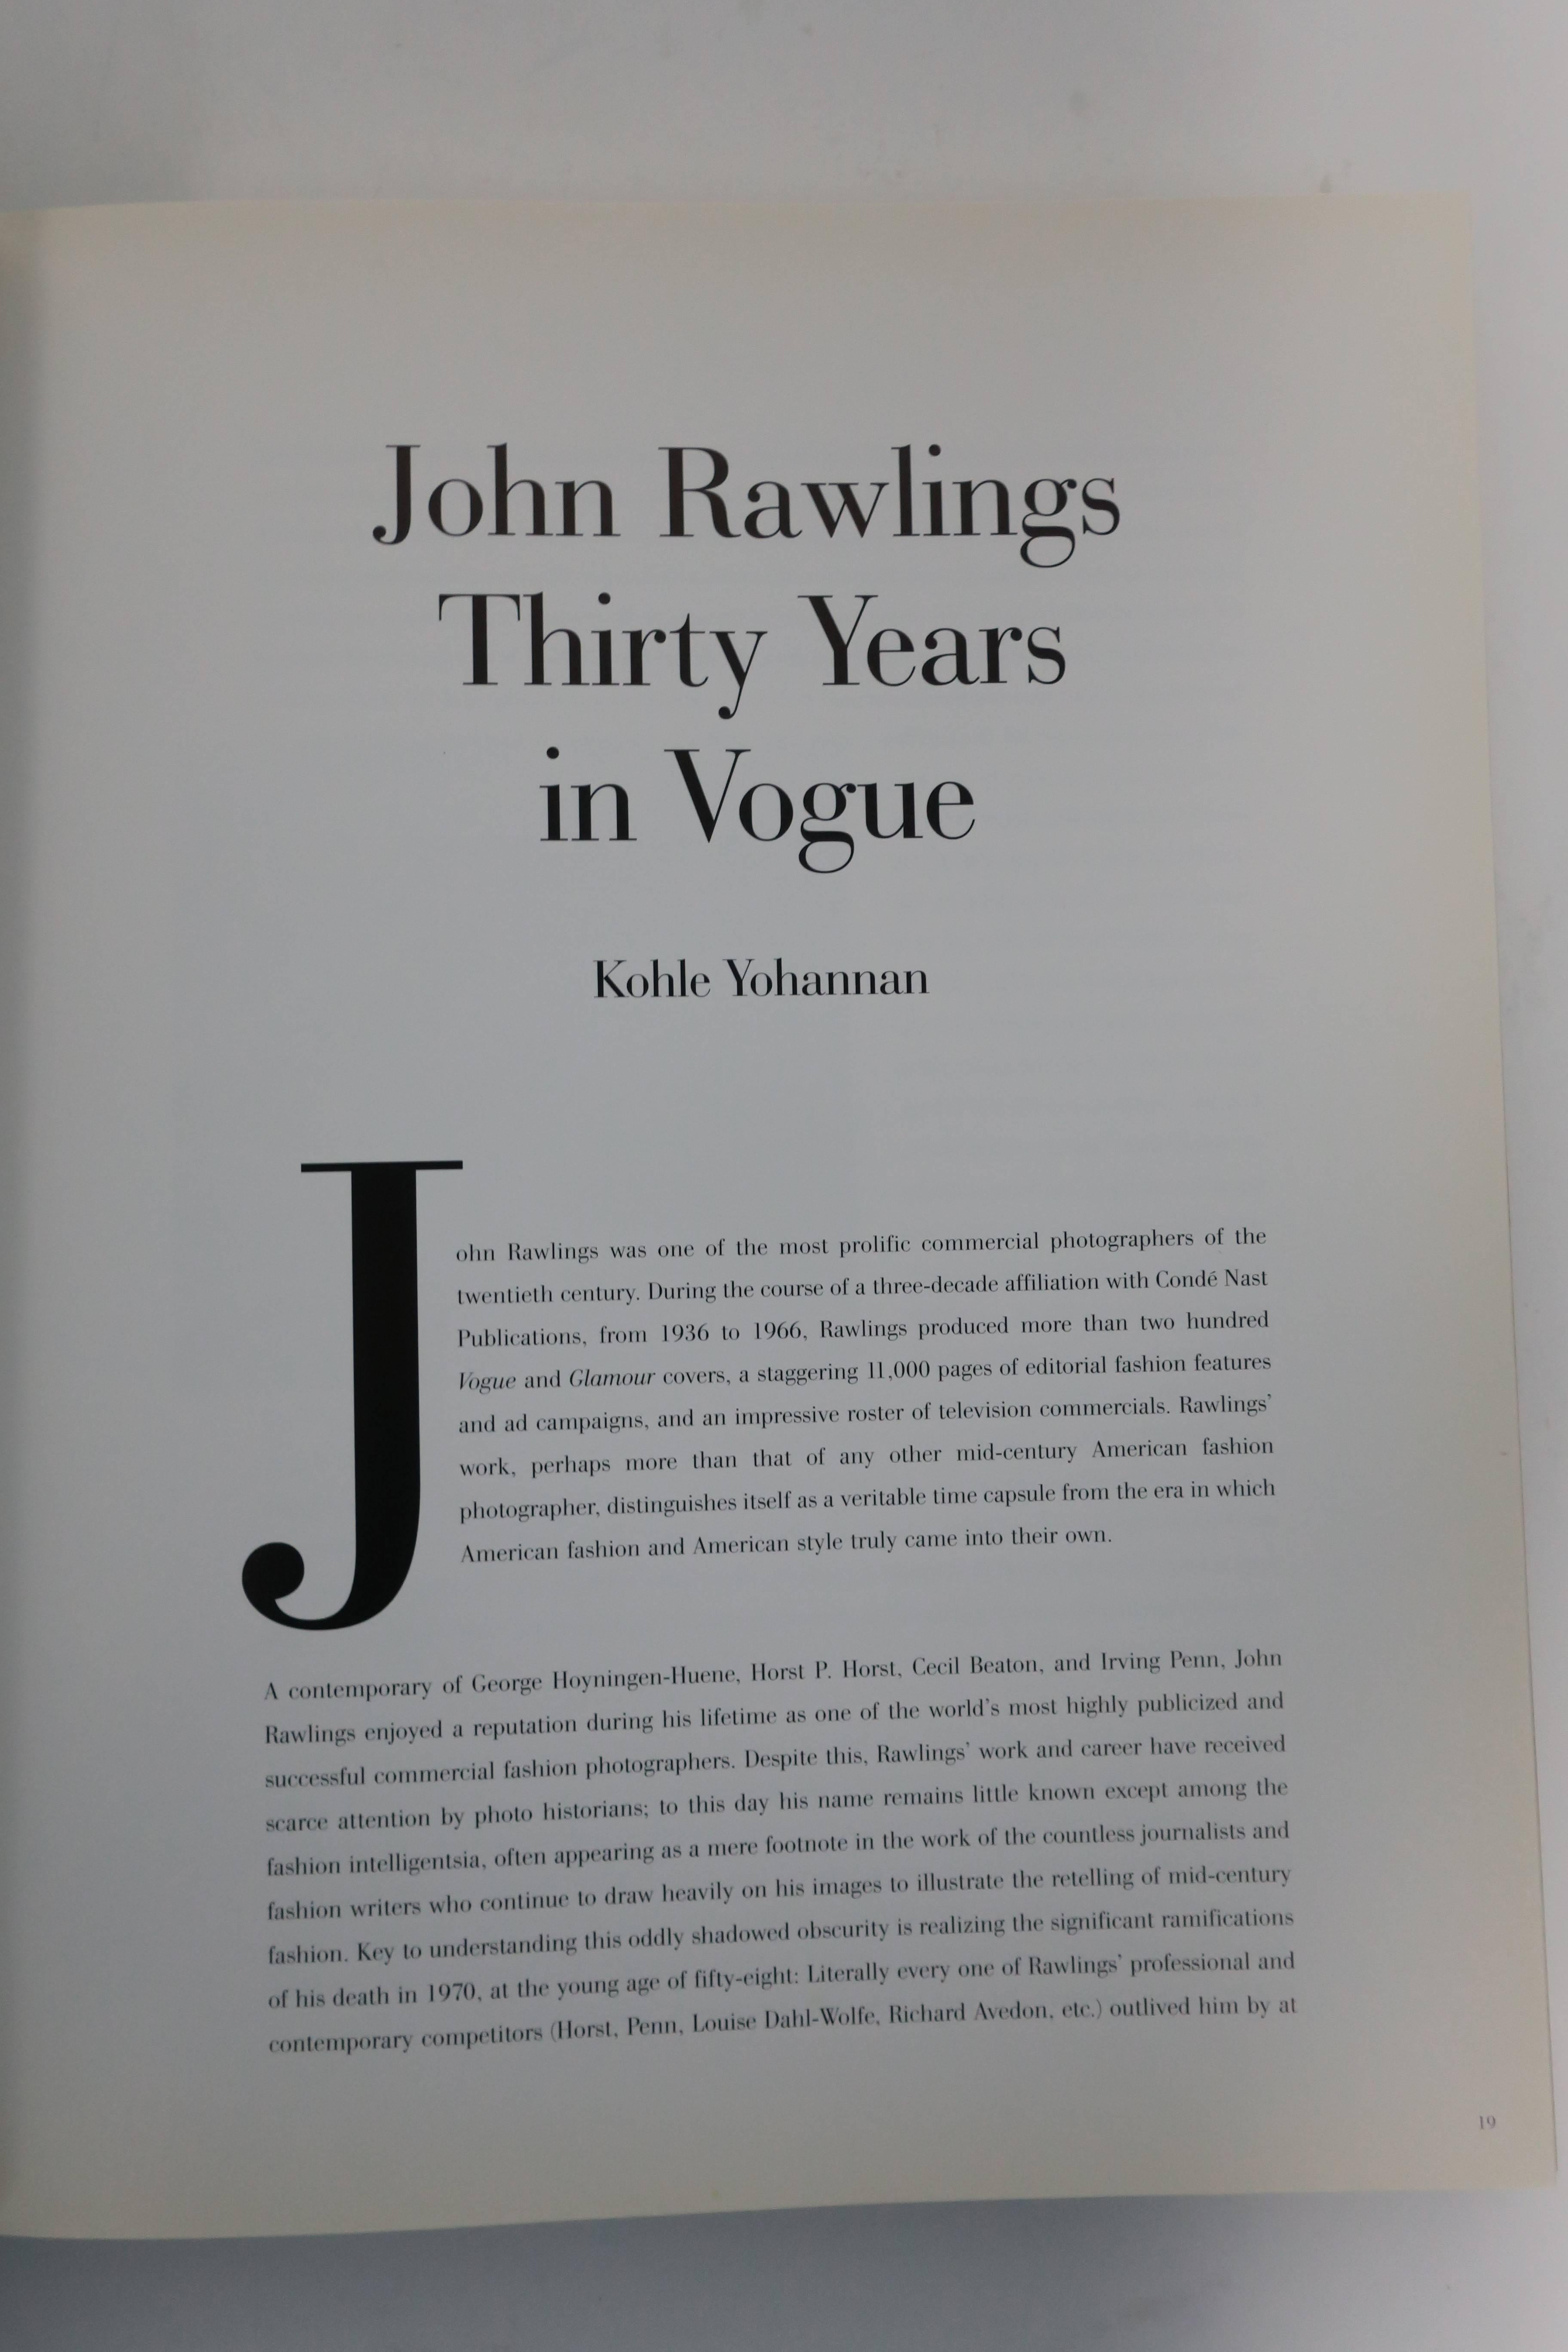 Contemporary Coffee Table Book, John Rawlings 30 Years in Vogue, Italy, 2001